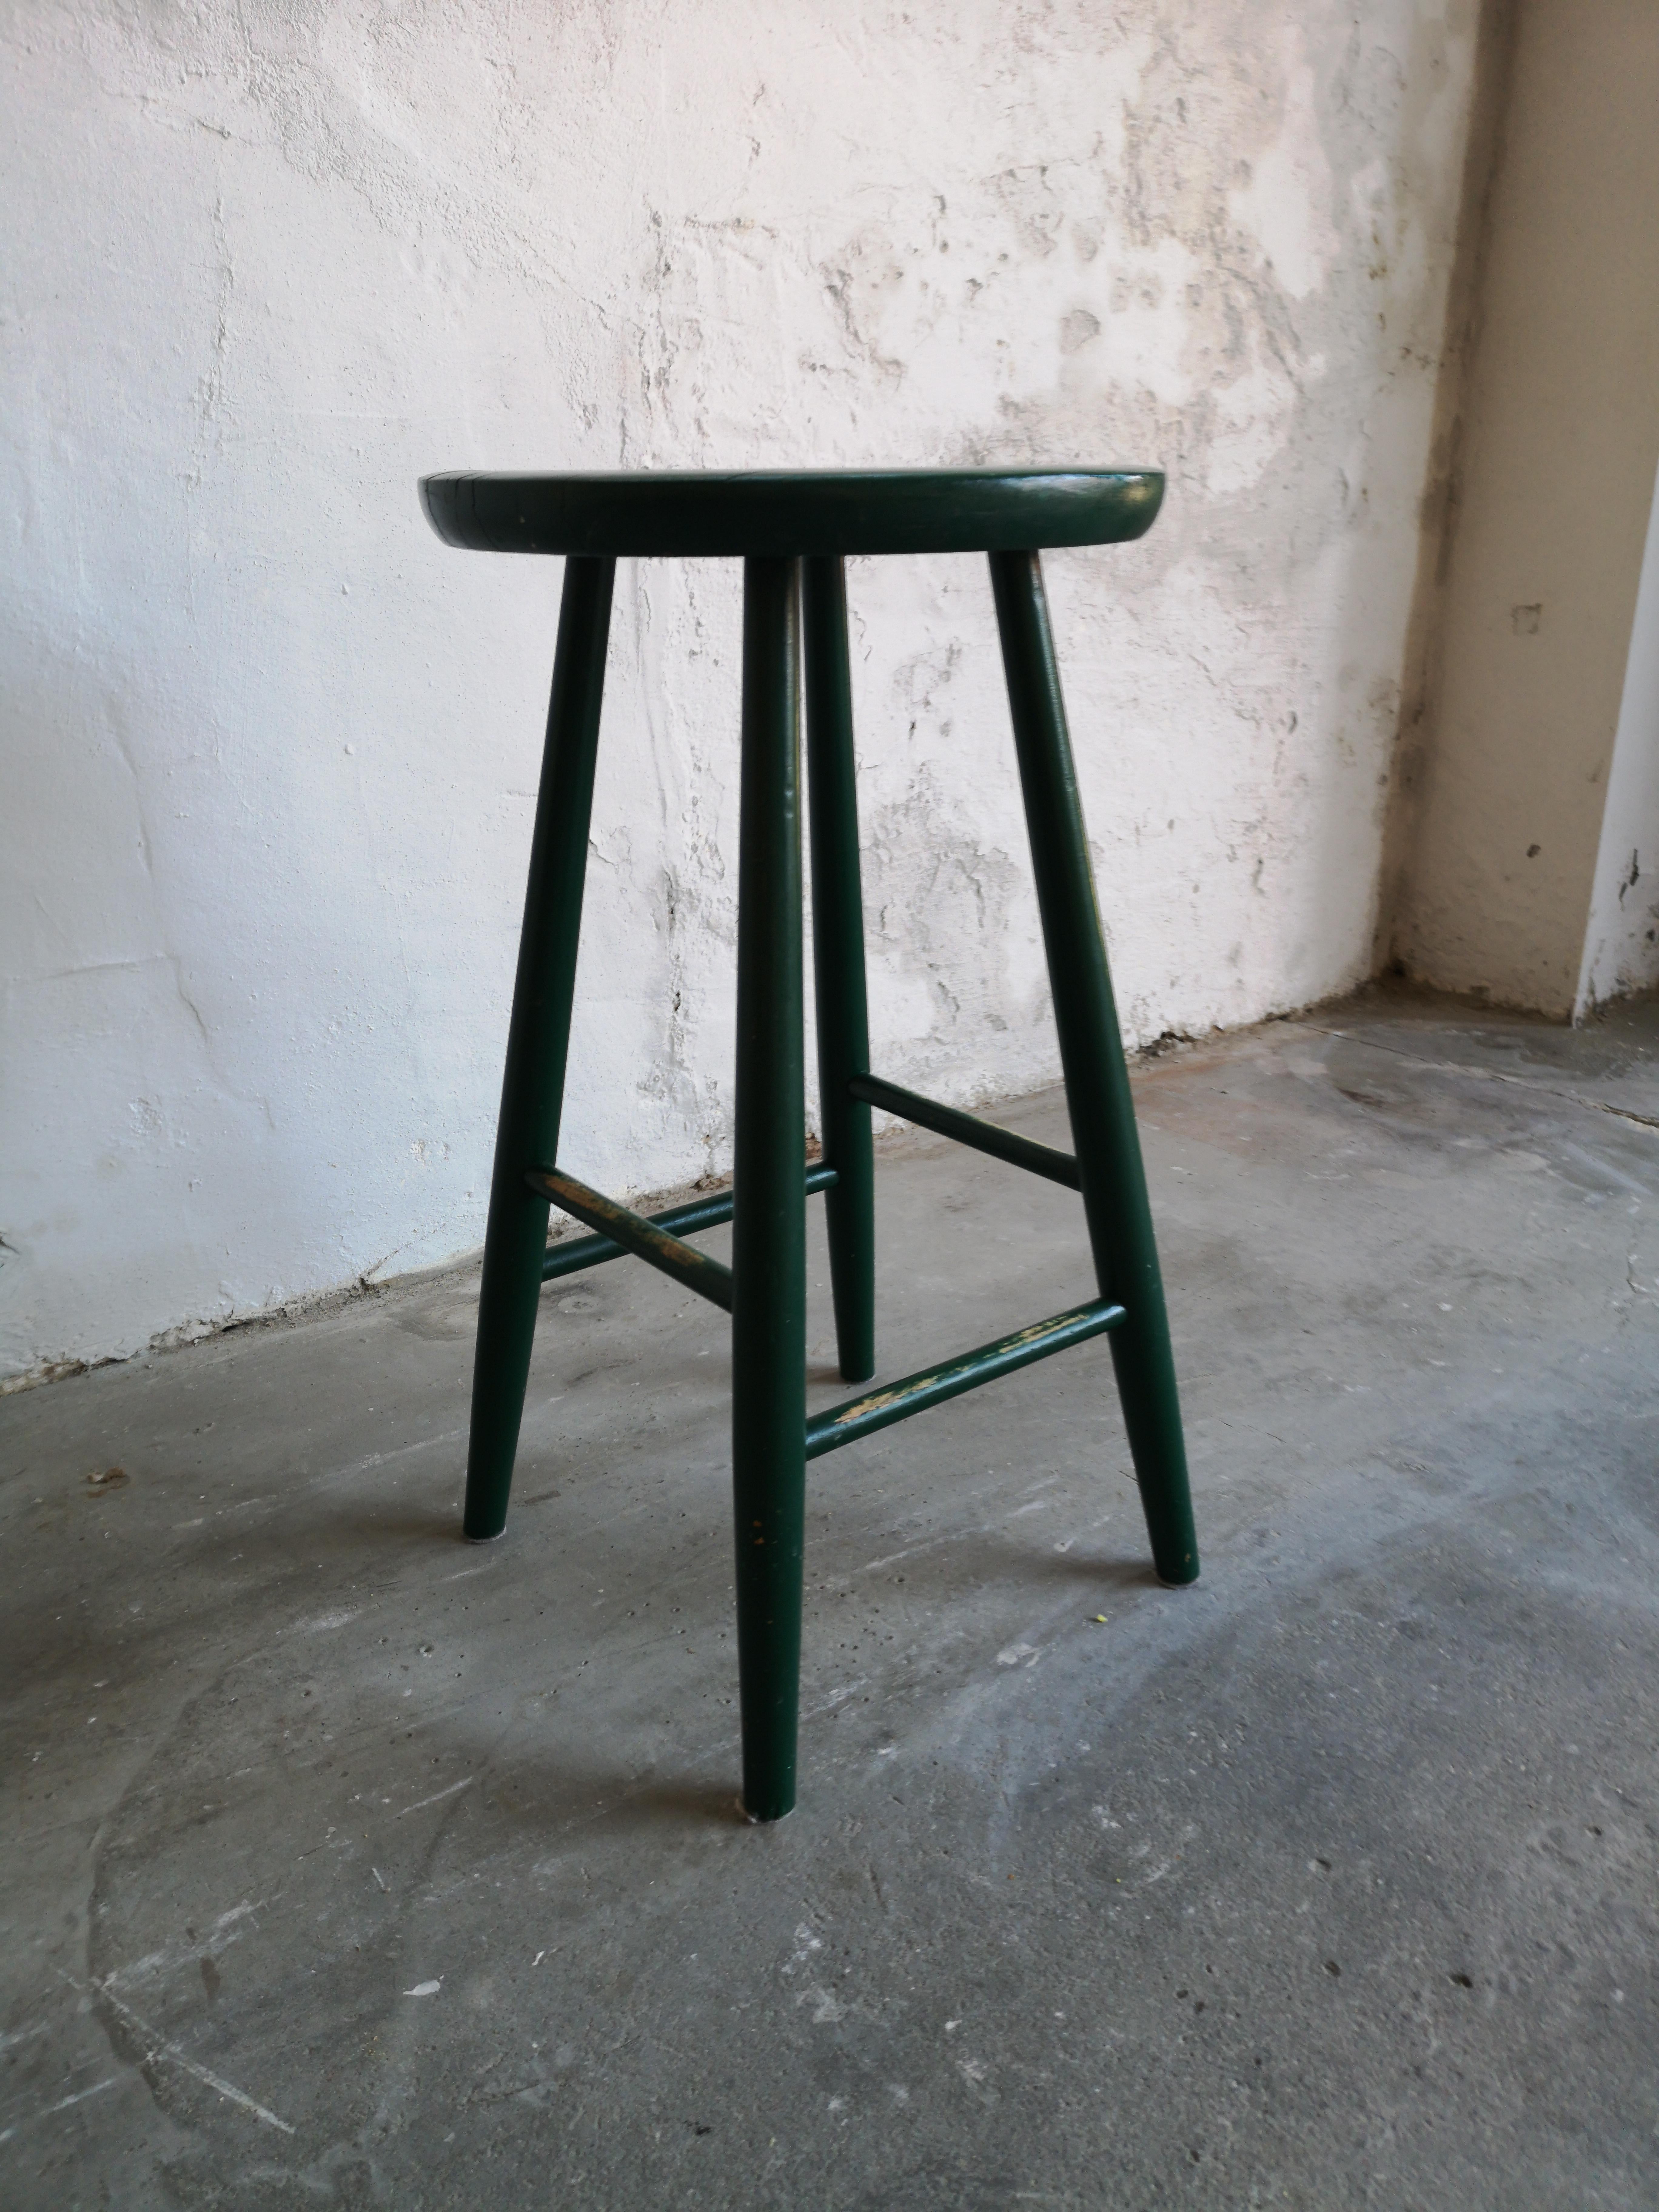 A lovely midcentury stool made by Hagafors Stolfabriken in Sweden. The designer is unknown, but Hagafors is known to have manufactured stools in similar style designed by Ilmari Tapiovaara.